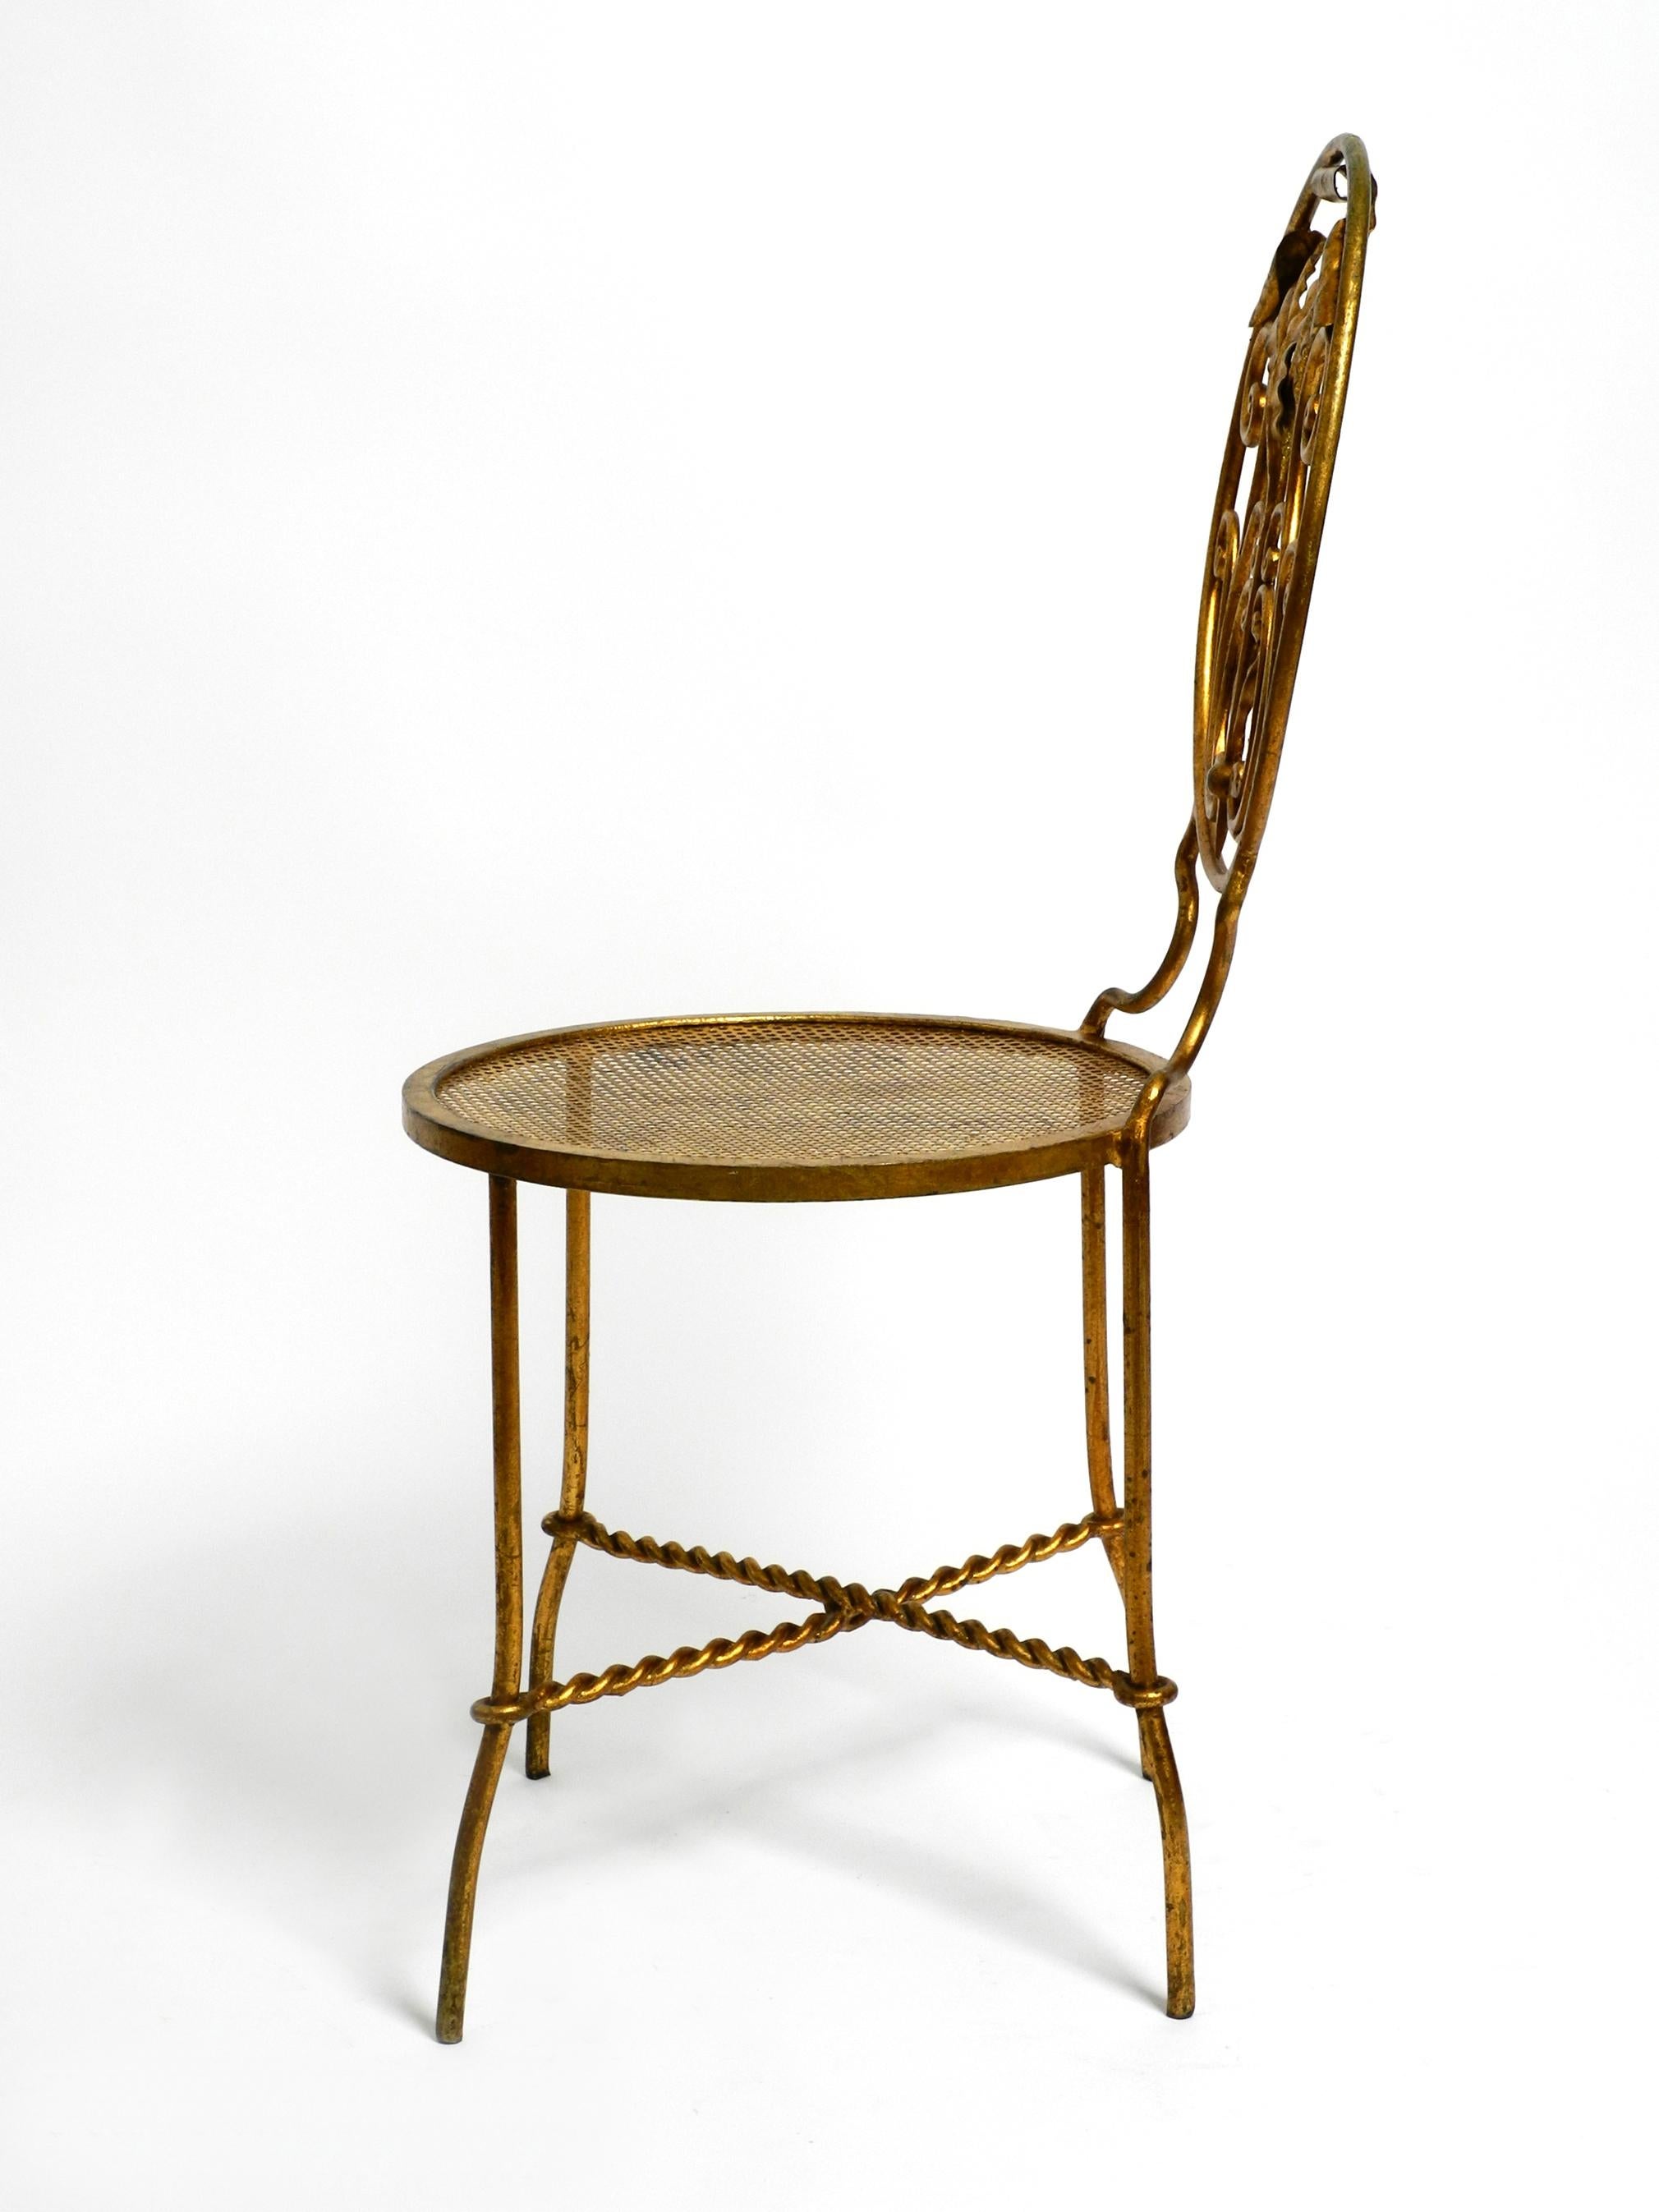 Beautiful Italian 70's Regency Design Gold Plated Wrought Iron Chair For Sale 1